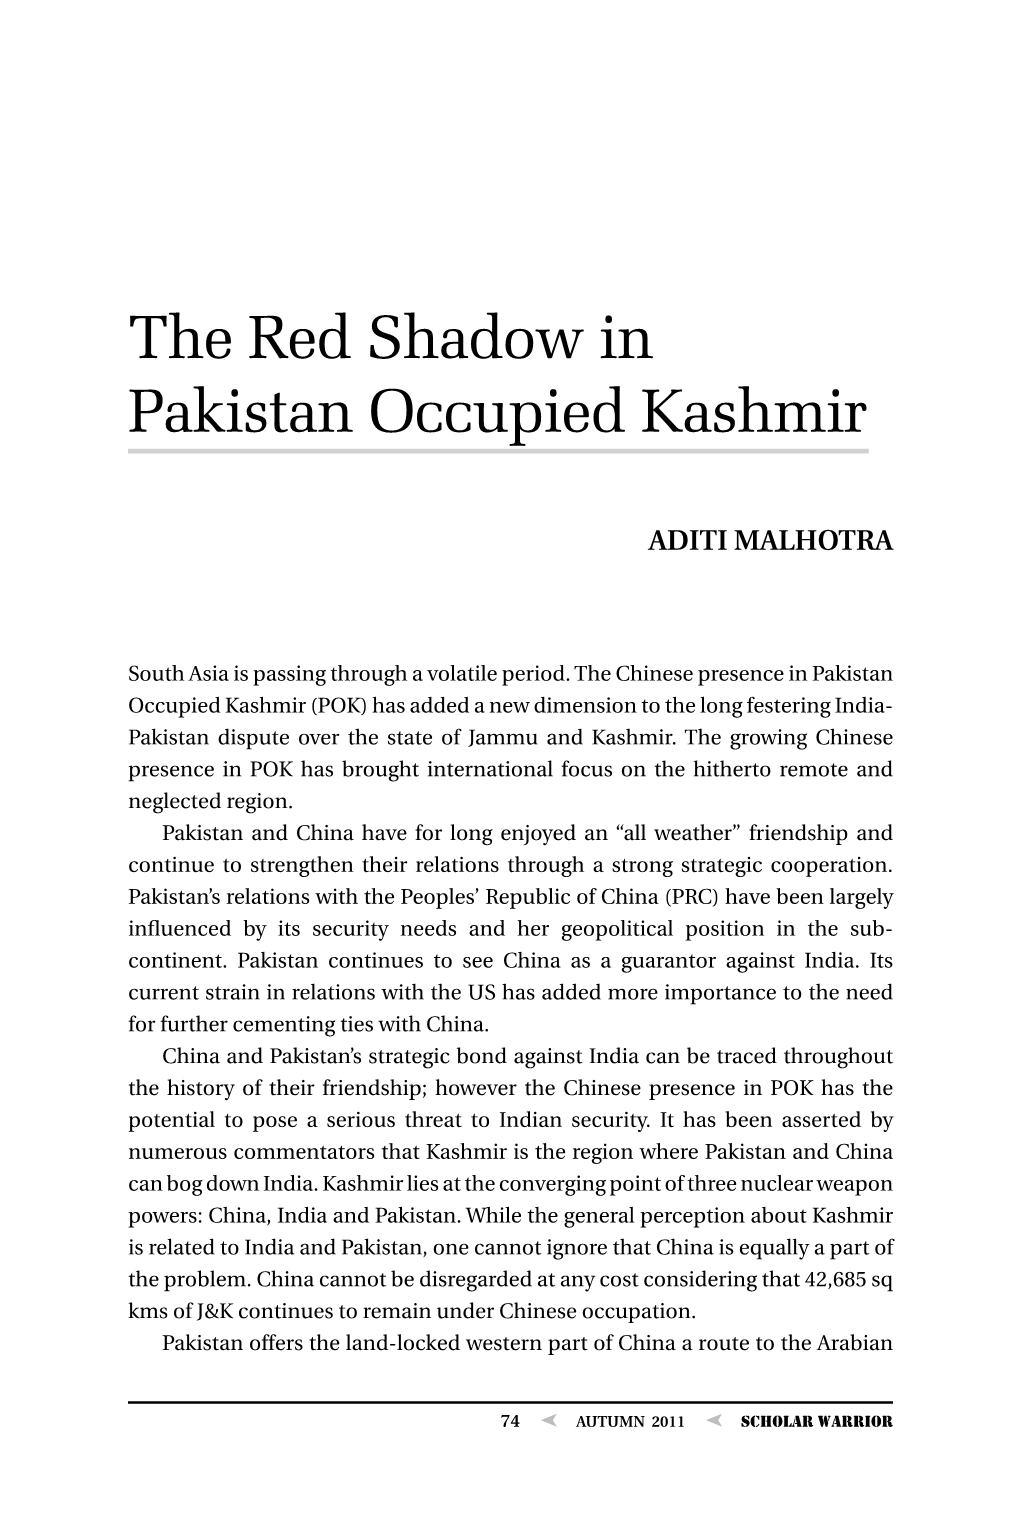 The Red Shadow in Pakistan Occupied Kashmir, By